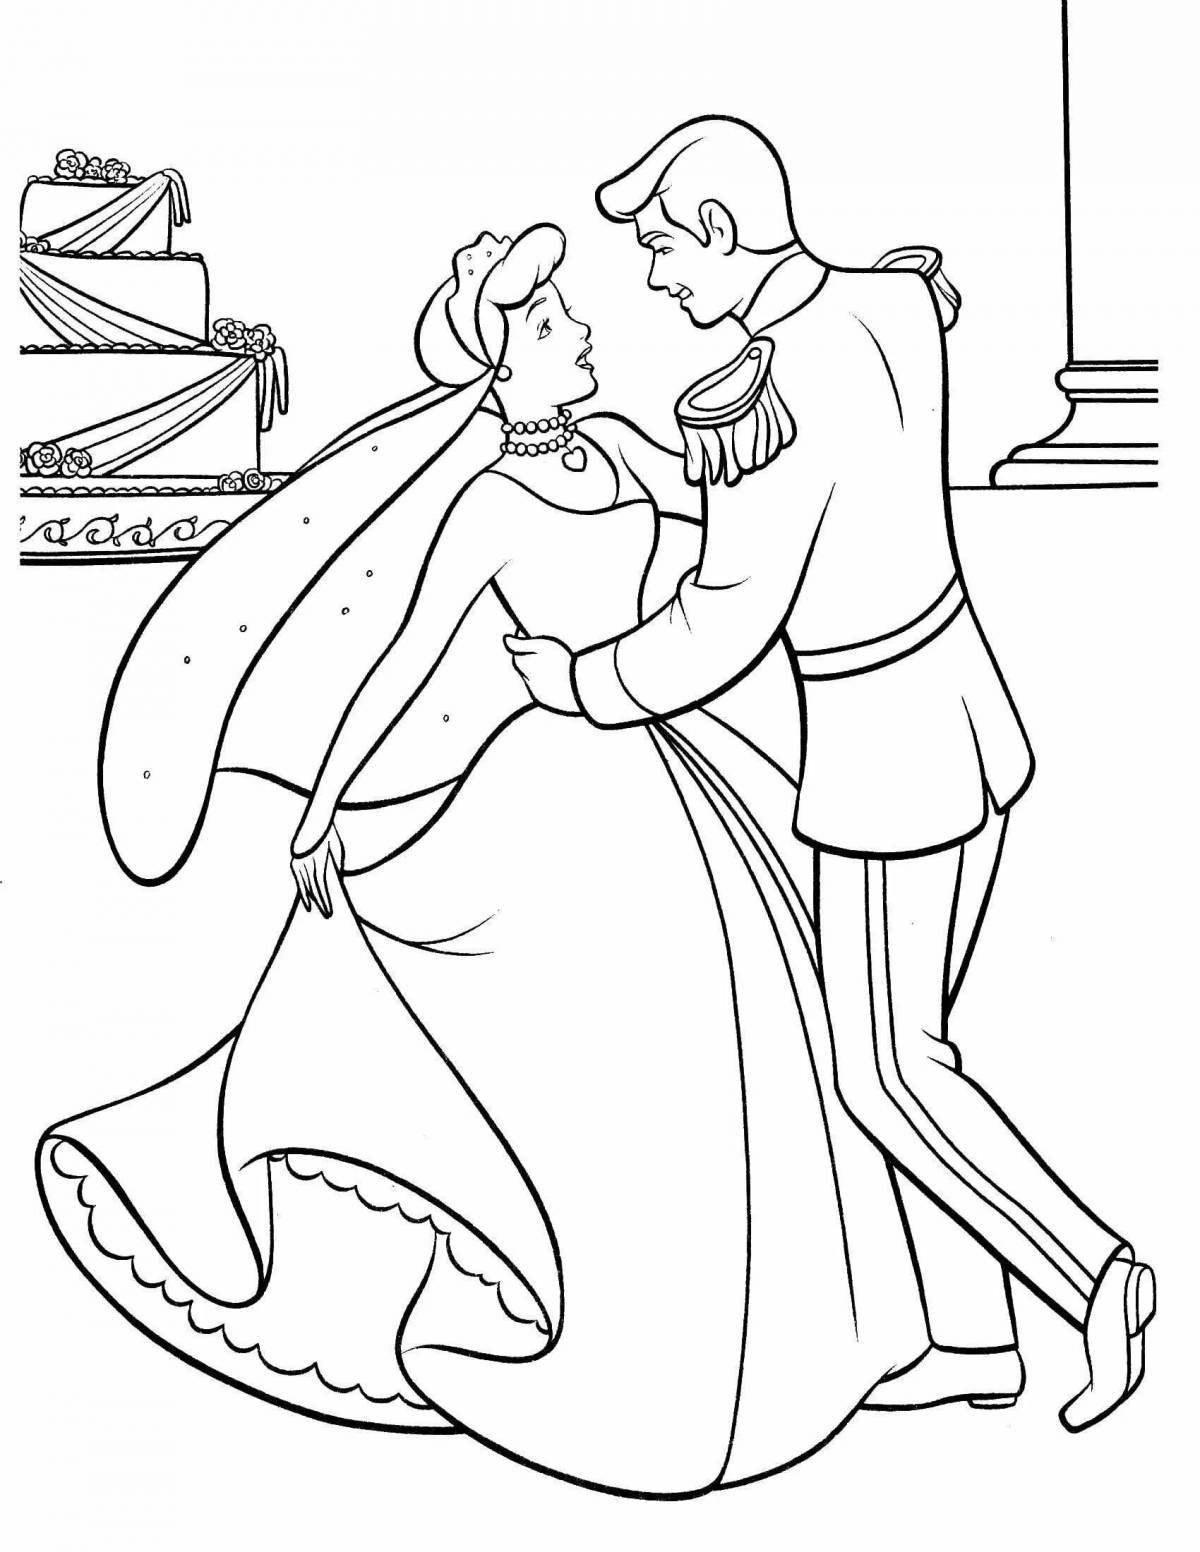 Coloring page exquisite princess at the ball